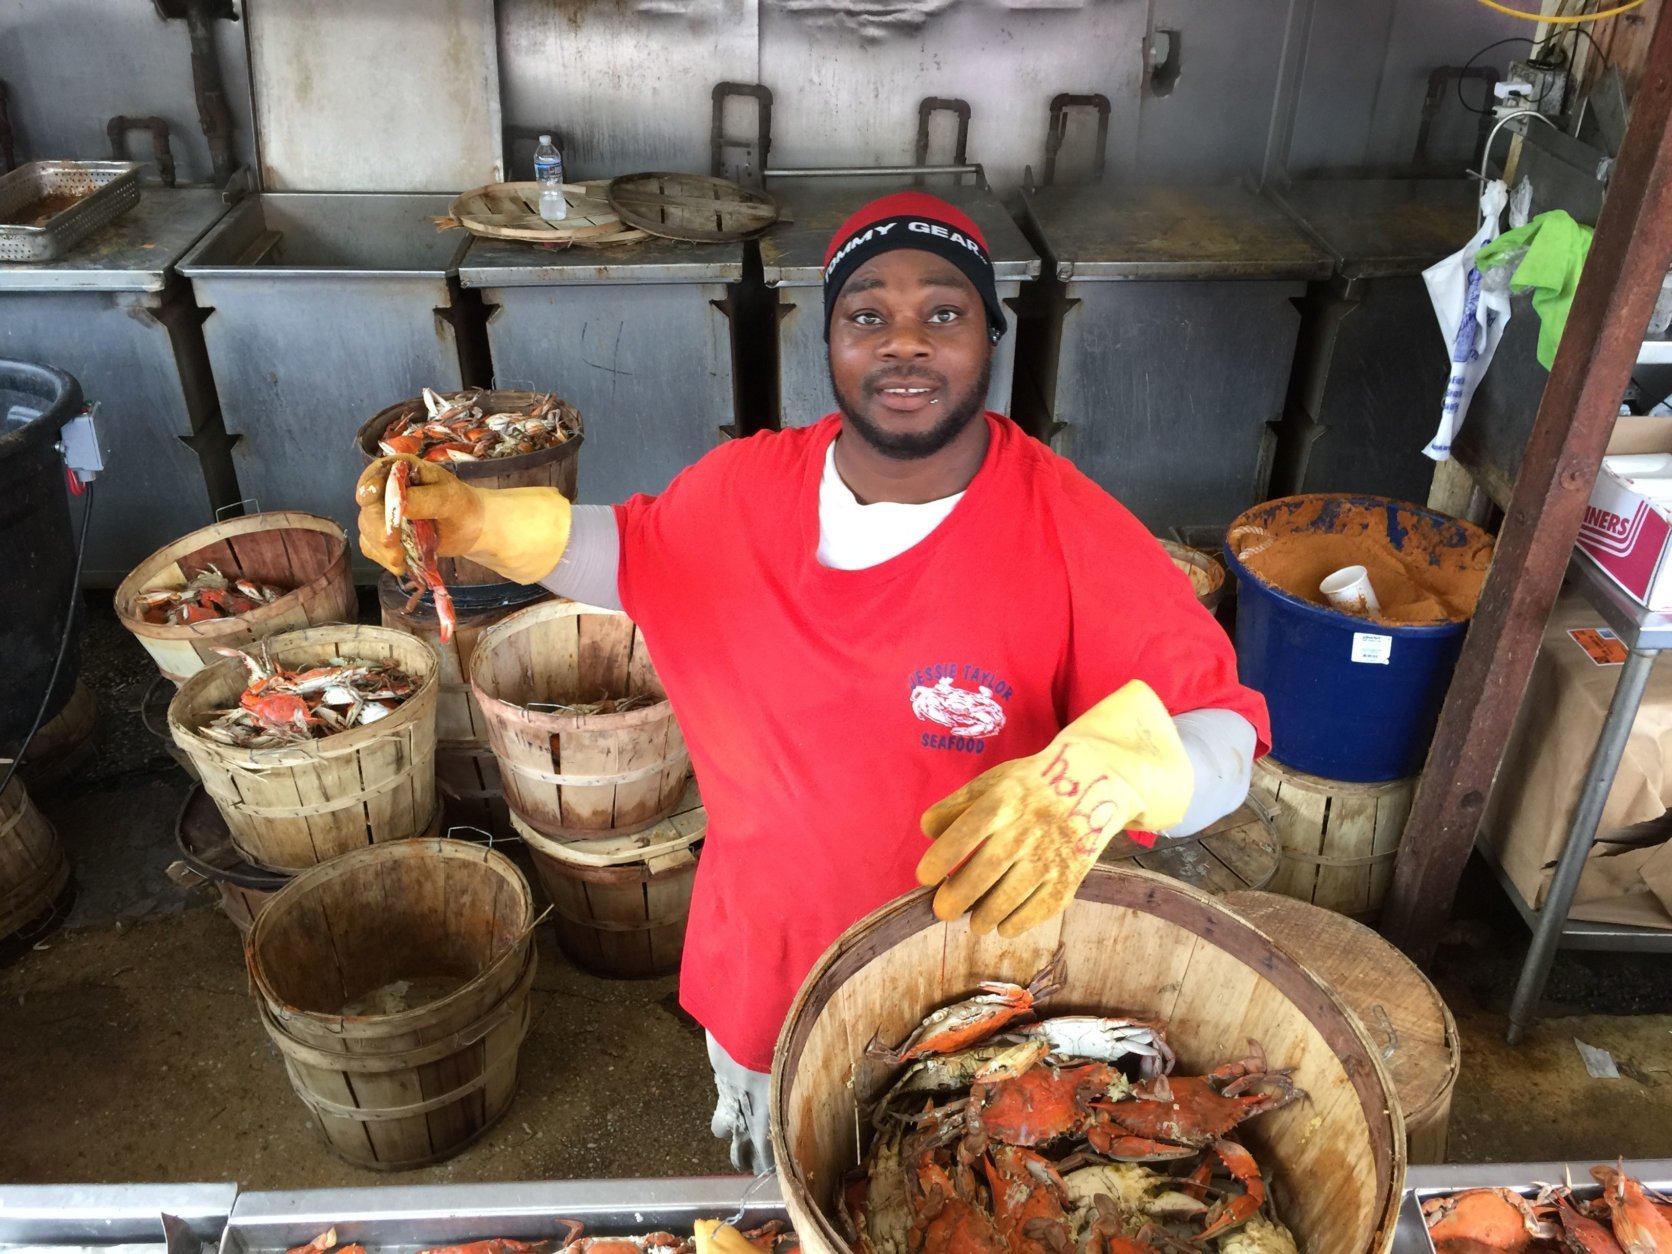 Working the seafood steamers in already-hot weather, B.J. Rogers of Chesapeake Va. said, "You just work hard and keep at it." (WTOP/Kristi King)